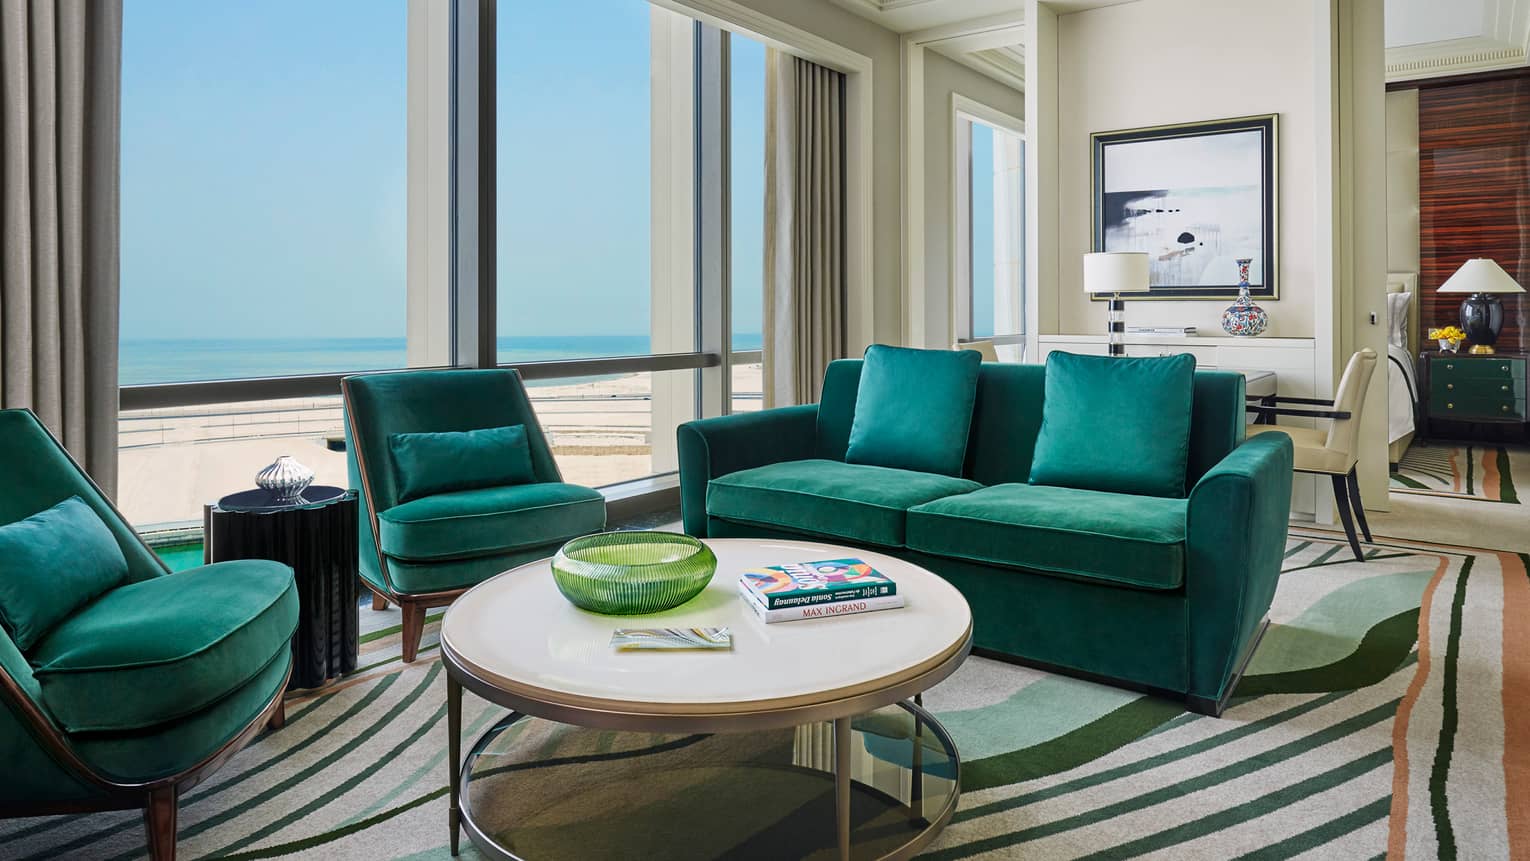 Four Seasons Executive Suite with emerald green velvet sofas, armchairs, round coffee table with books, sunny windows